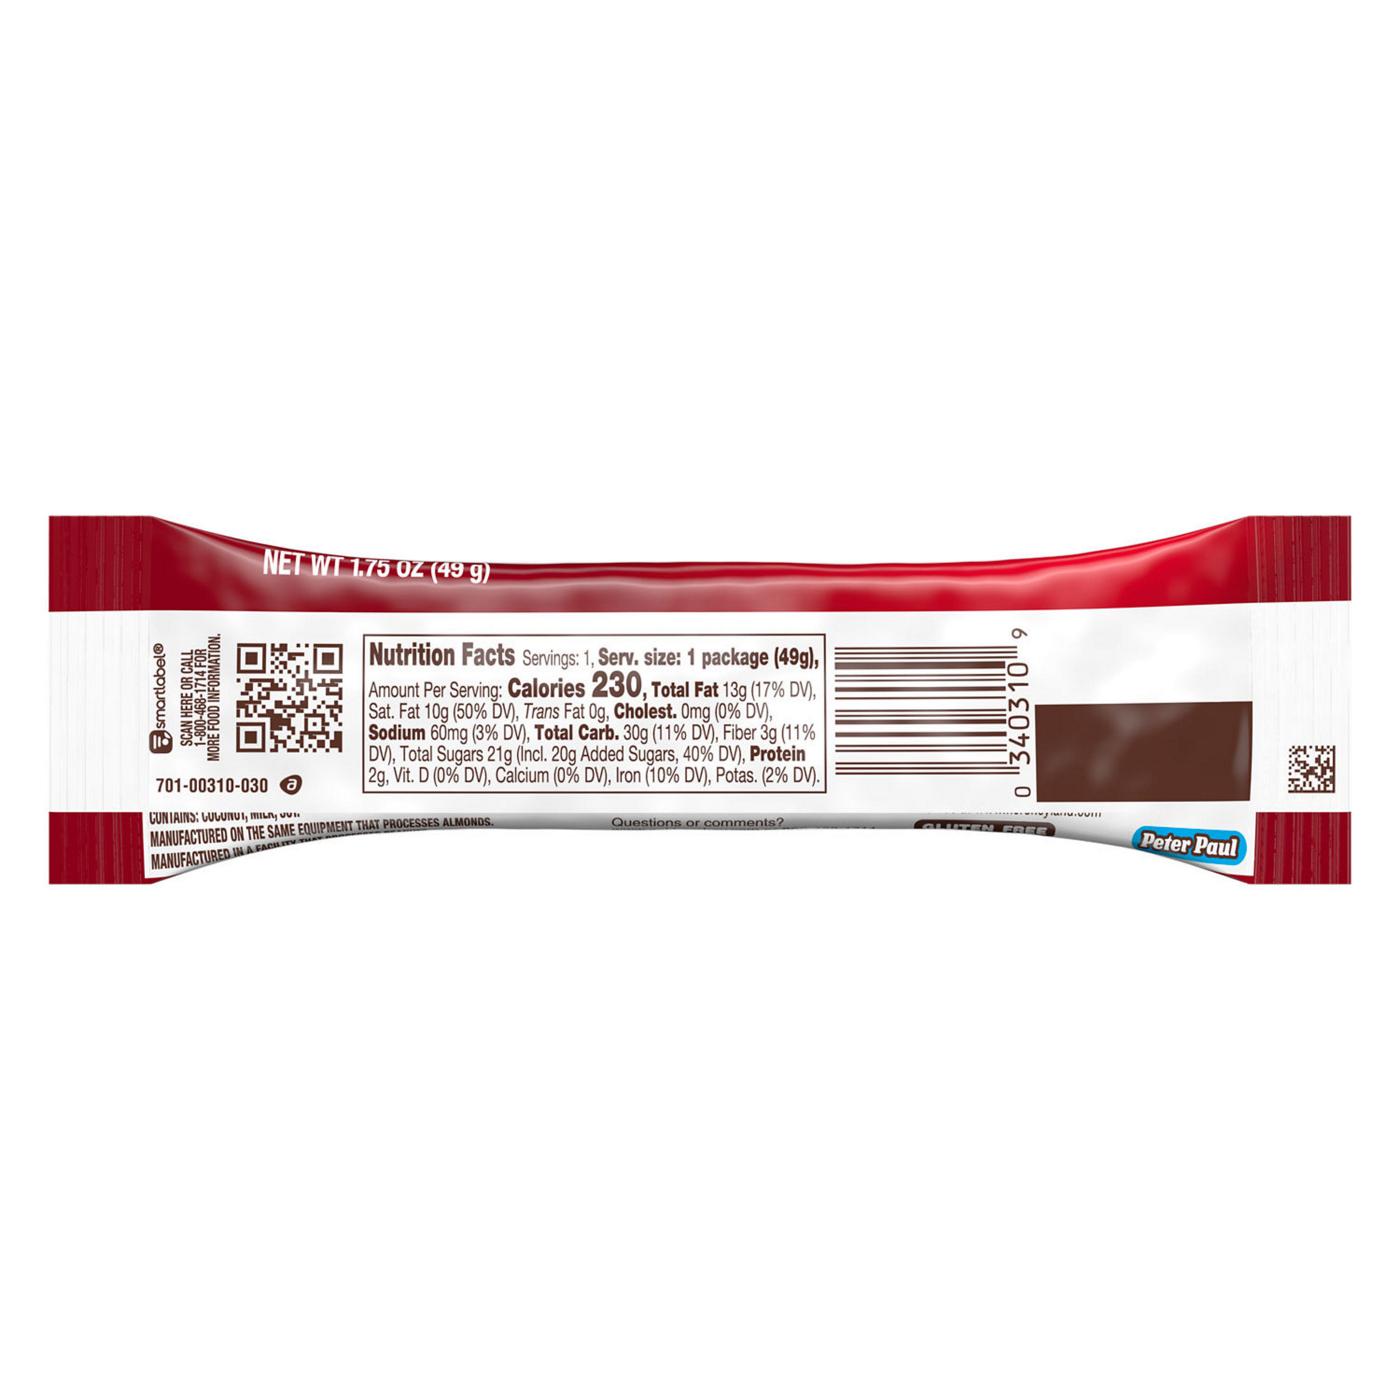 Mounds Dark Chocolate & Coconut Candy Bar; image 3 of 5